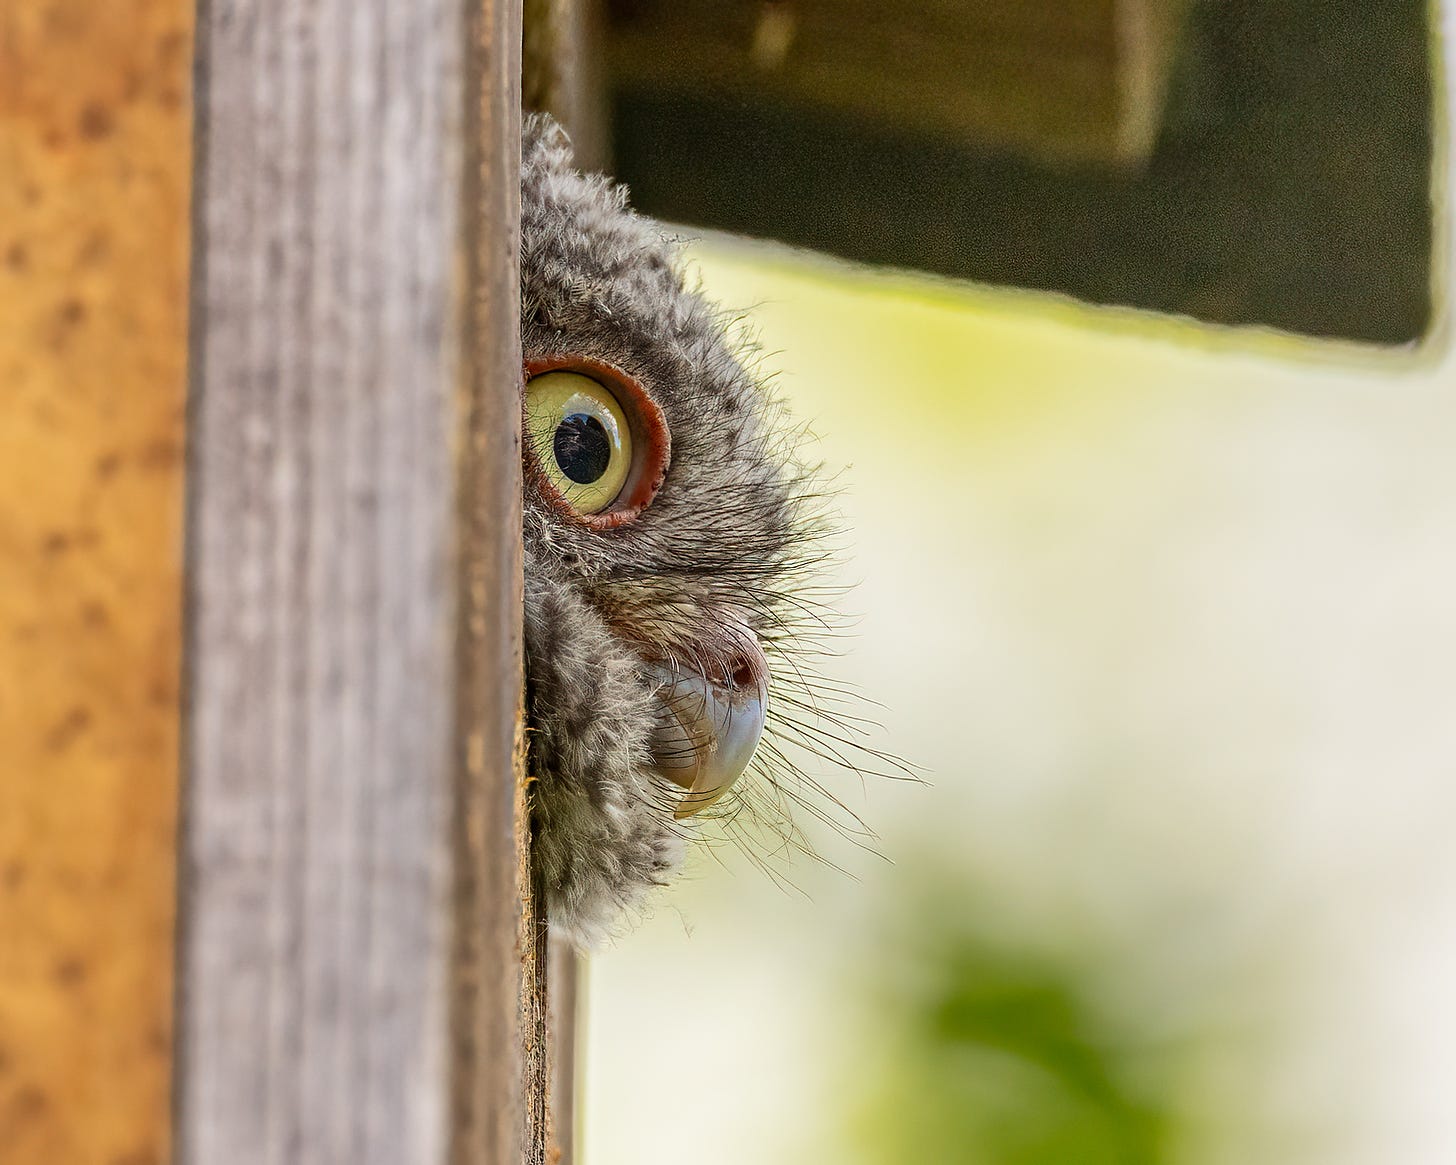 A nestling owl looks out of the box with his big yellow eyes wide open.